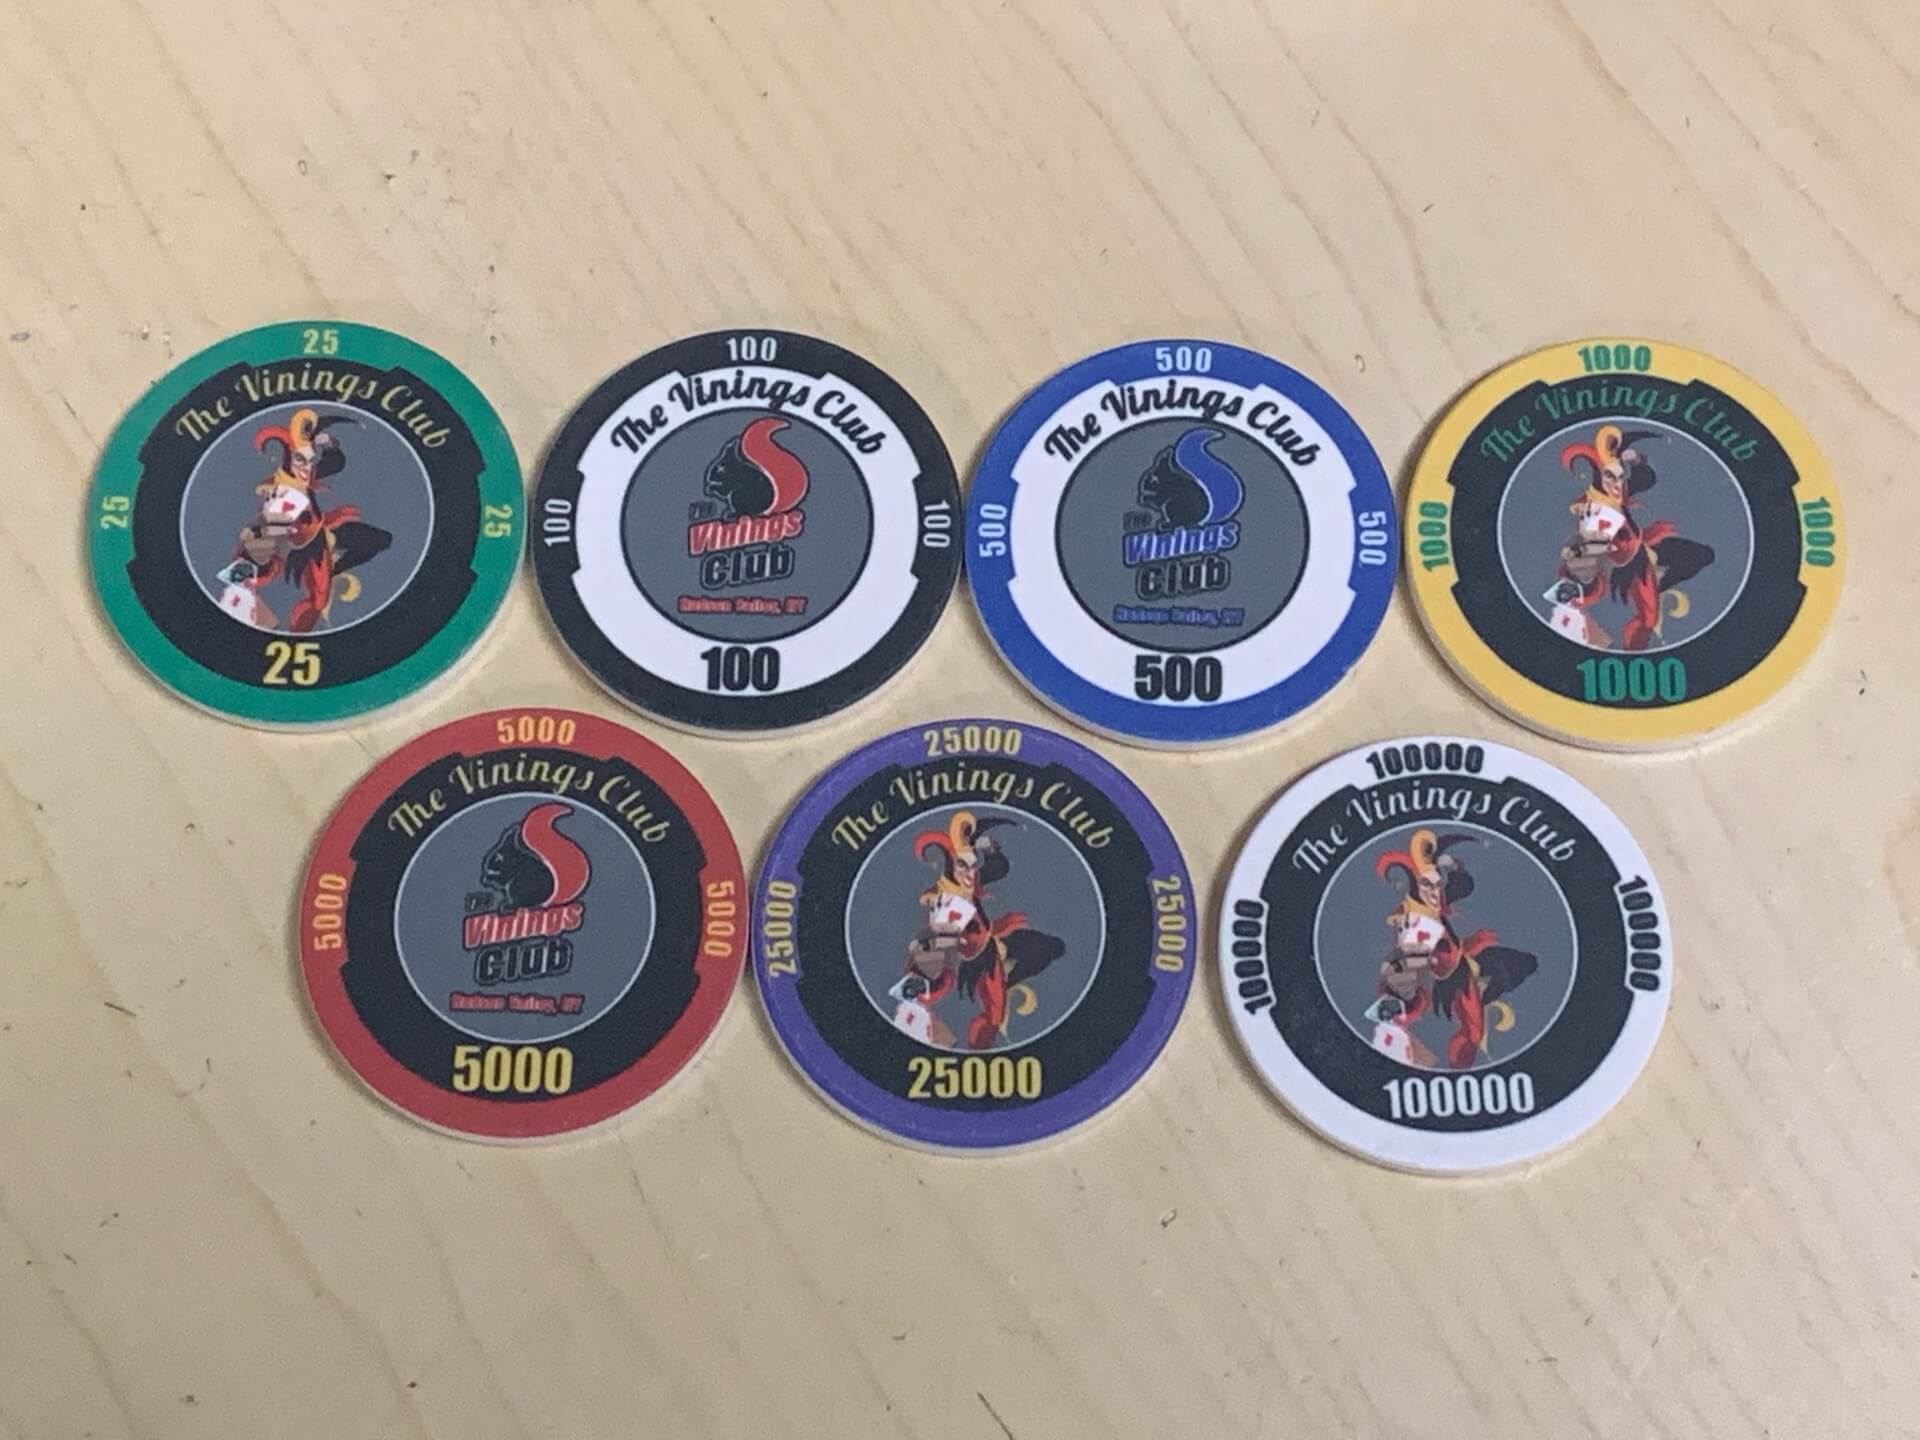 Custom Chips for Card Room Client - Rick Stockfield - Vinings Club Chips - Complete custom designed poker chip set made for the Vinings Card Club by Aurora Poker Gear. Features various ceramic polymer chip denominations with custom edges, inlays, and unique center graphics of their "Blind Squirrel" logo.